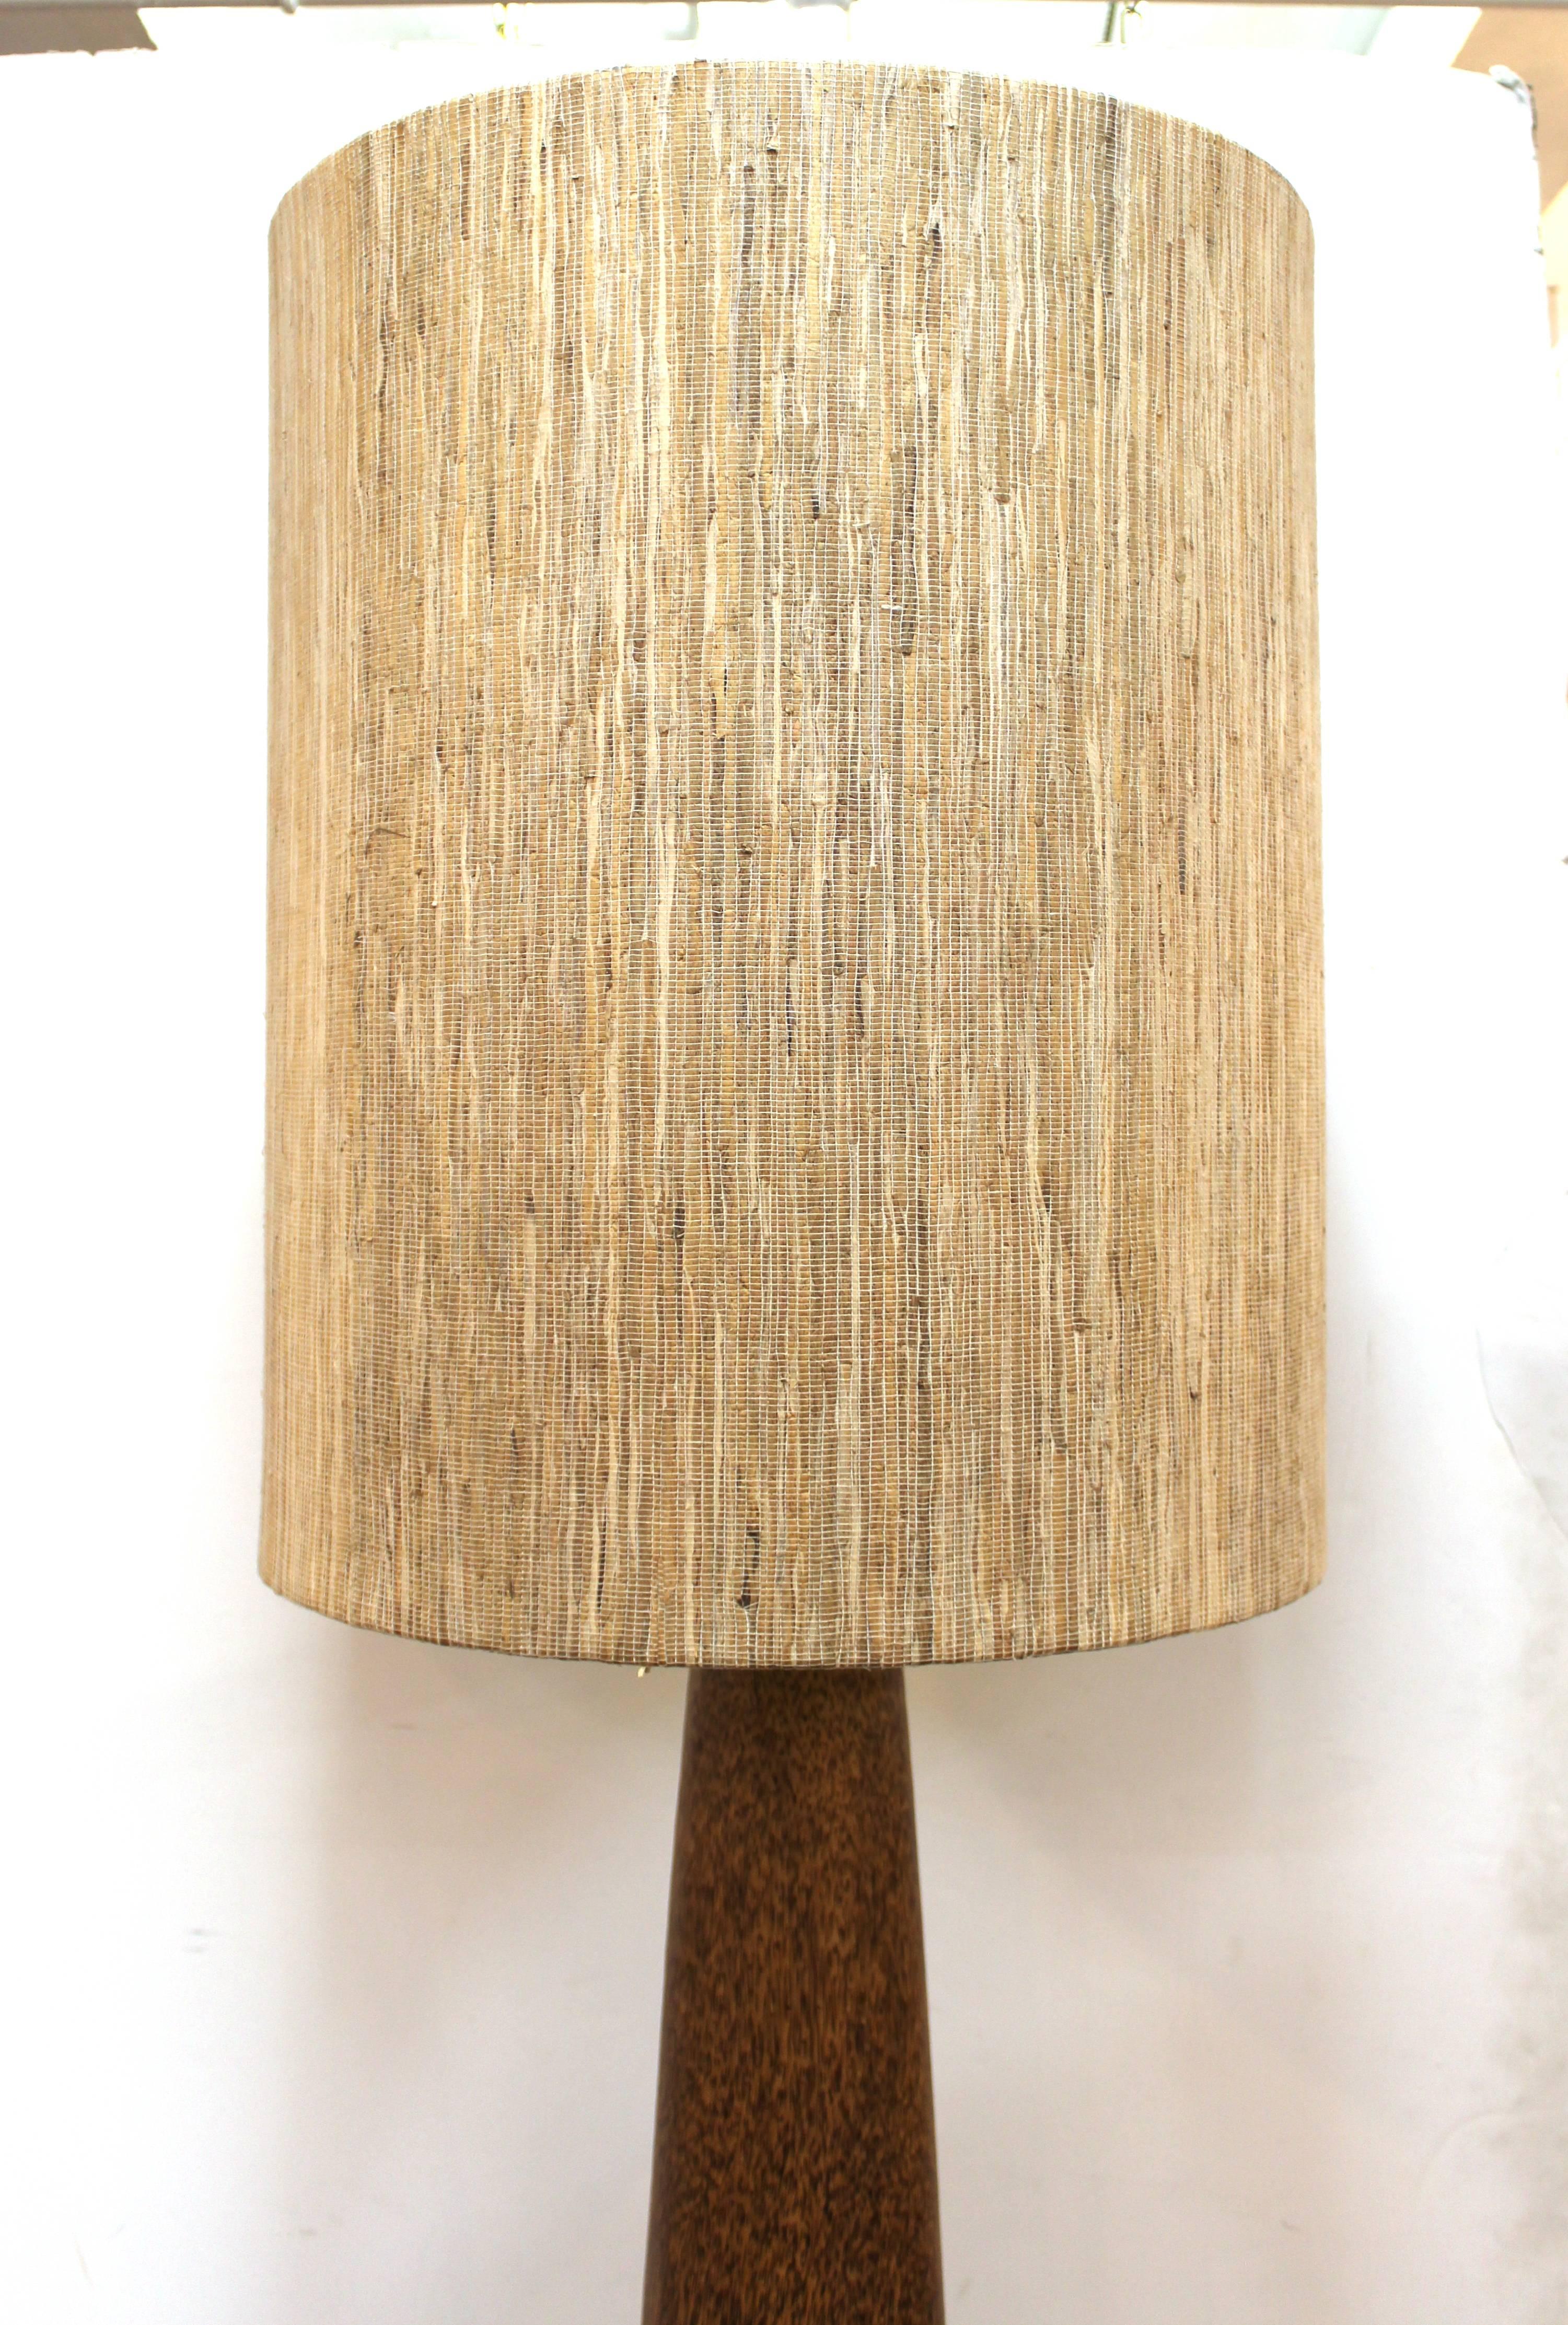 Mid-Century Modern floor lamp with trunk column body. Crafted in light wood with a large woven reed shade. Some pulls to the shade material with wear appropriate to age and use. The lamp is in good vintage condition. 

With the shade the height of